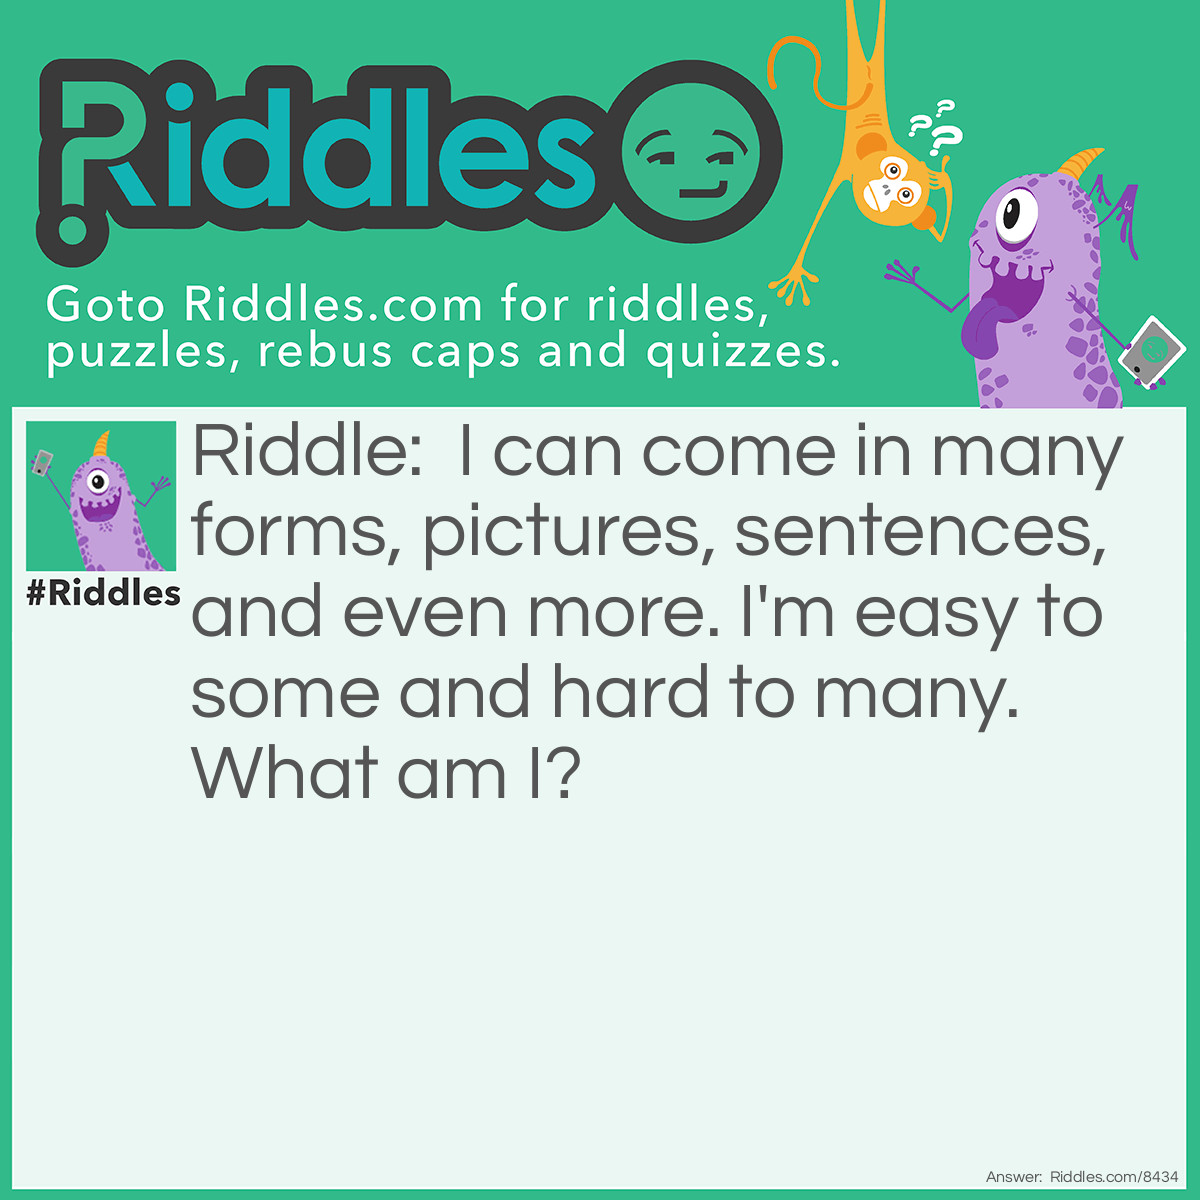 Riddle: I can come in many forms, pictures, sentences, and even more. I'm easy to some and hard to many. What am I? Answer: A Riddle.